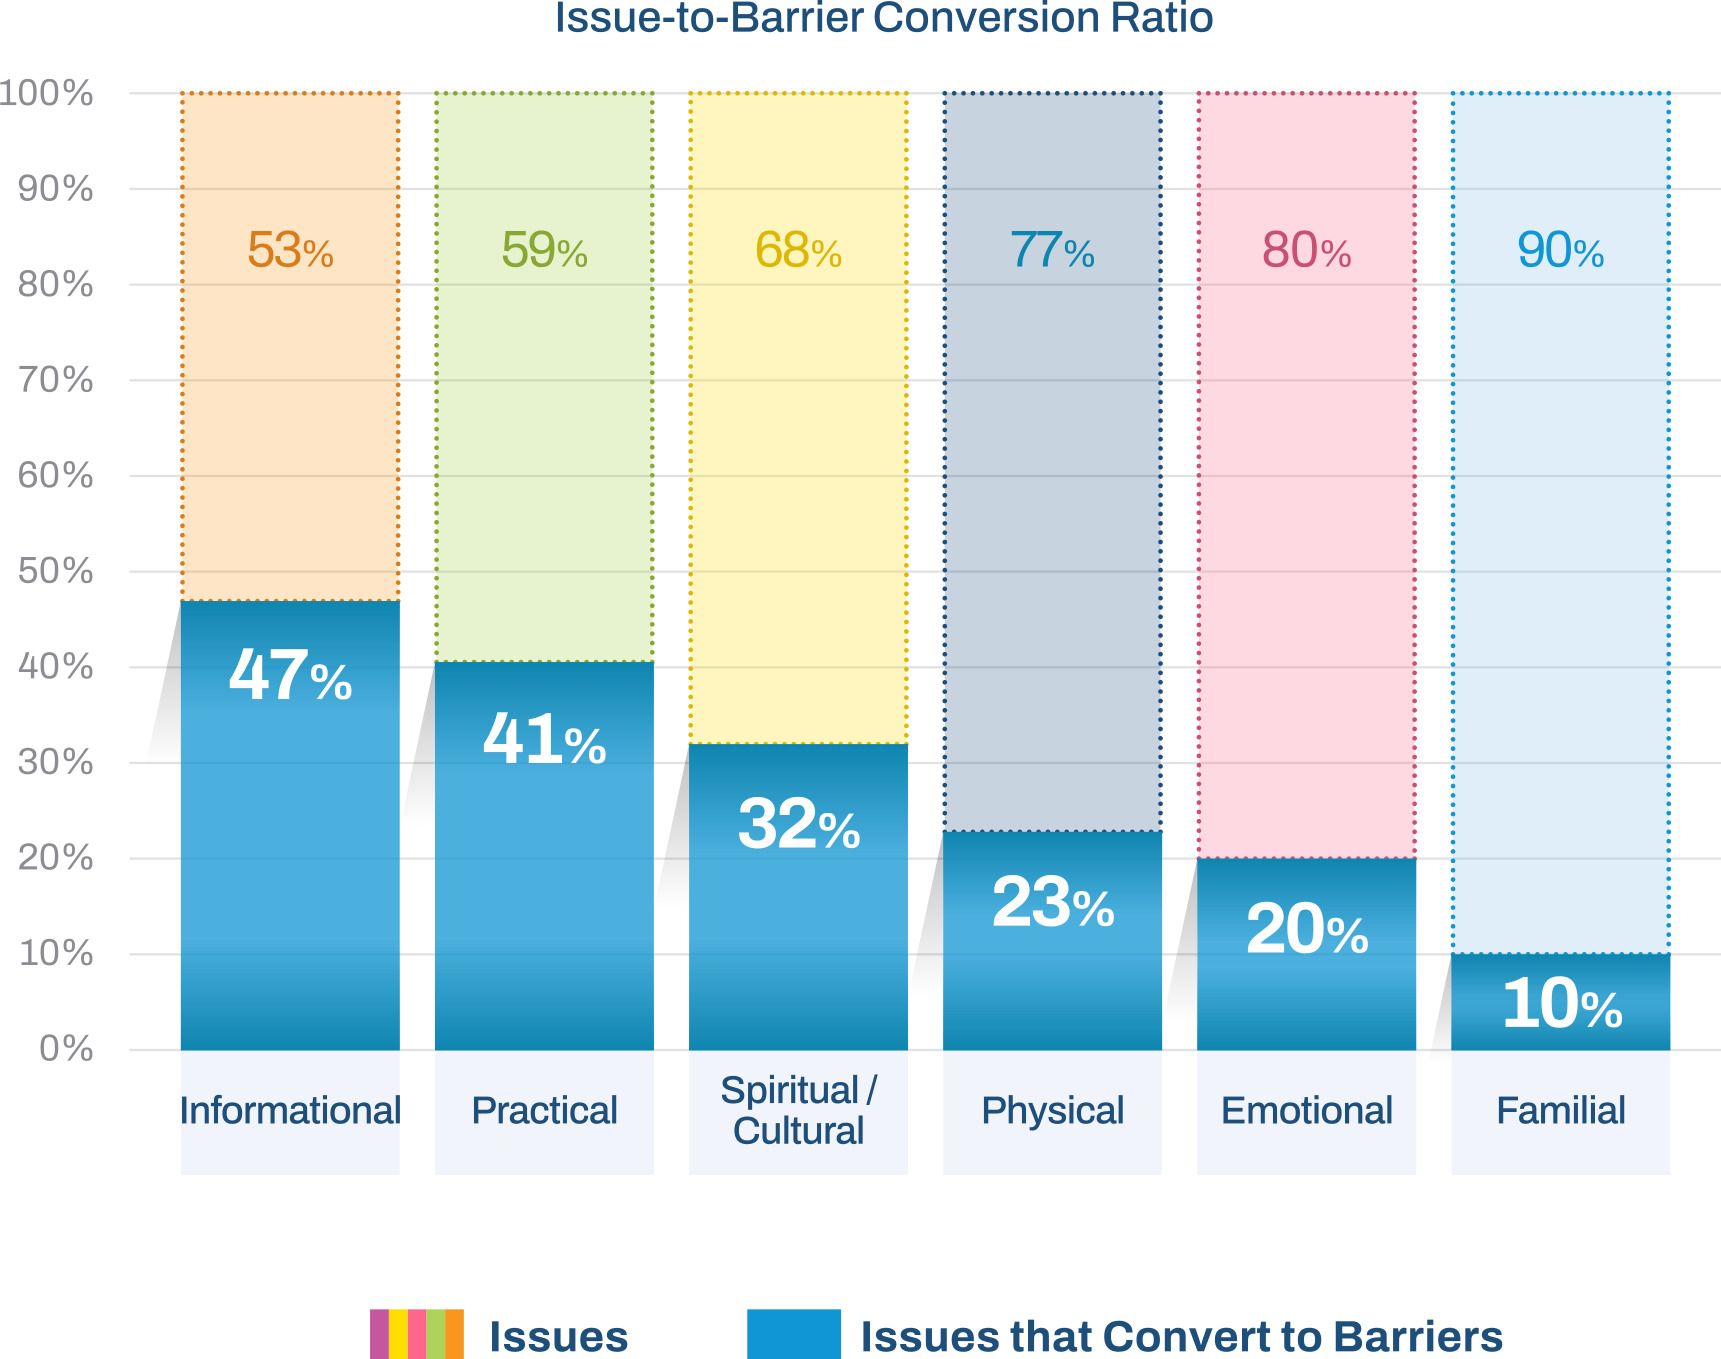 Issue-to-Barrier Conversion Ratio